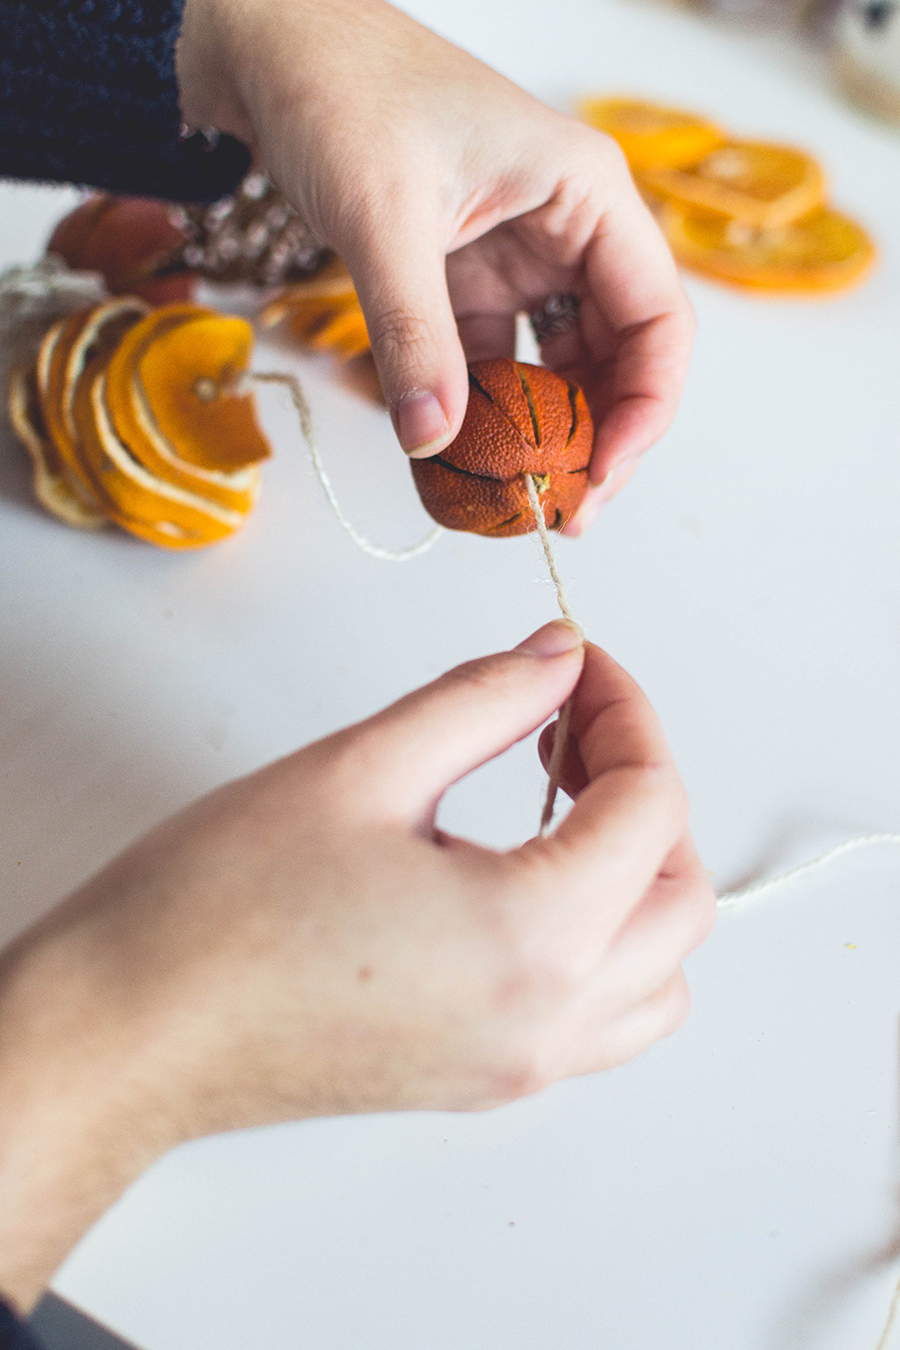 Add clementines to your DIY winter scented garland